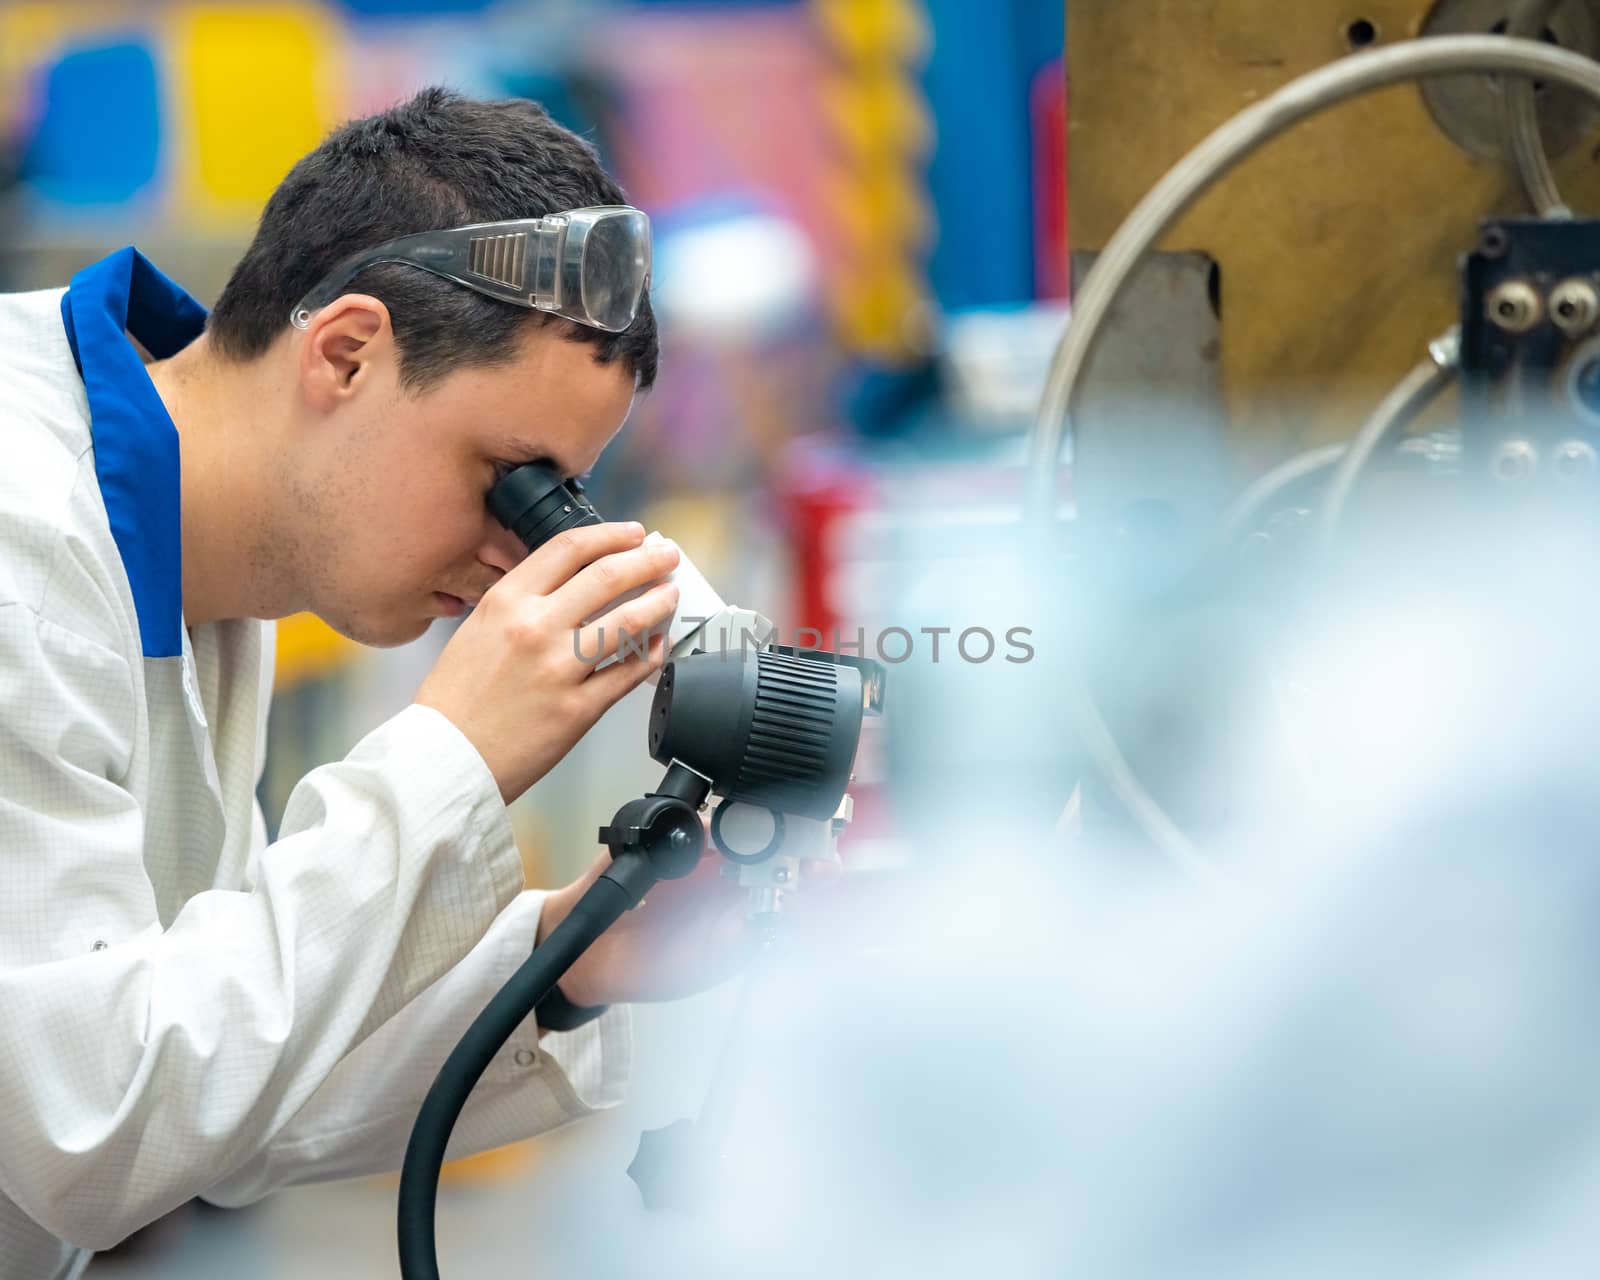 the engineer checks the correct setting of the metal mold for castings in the factory using a microscope by Edophoto